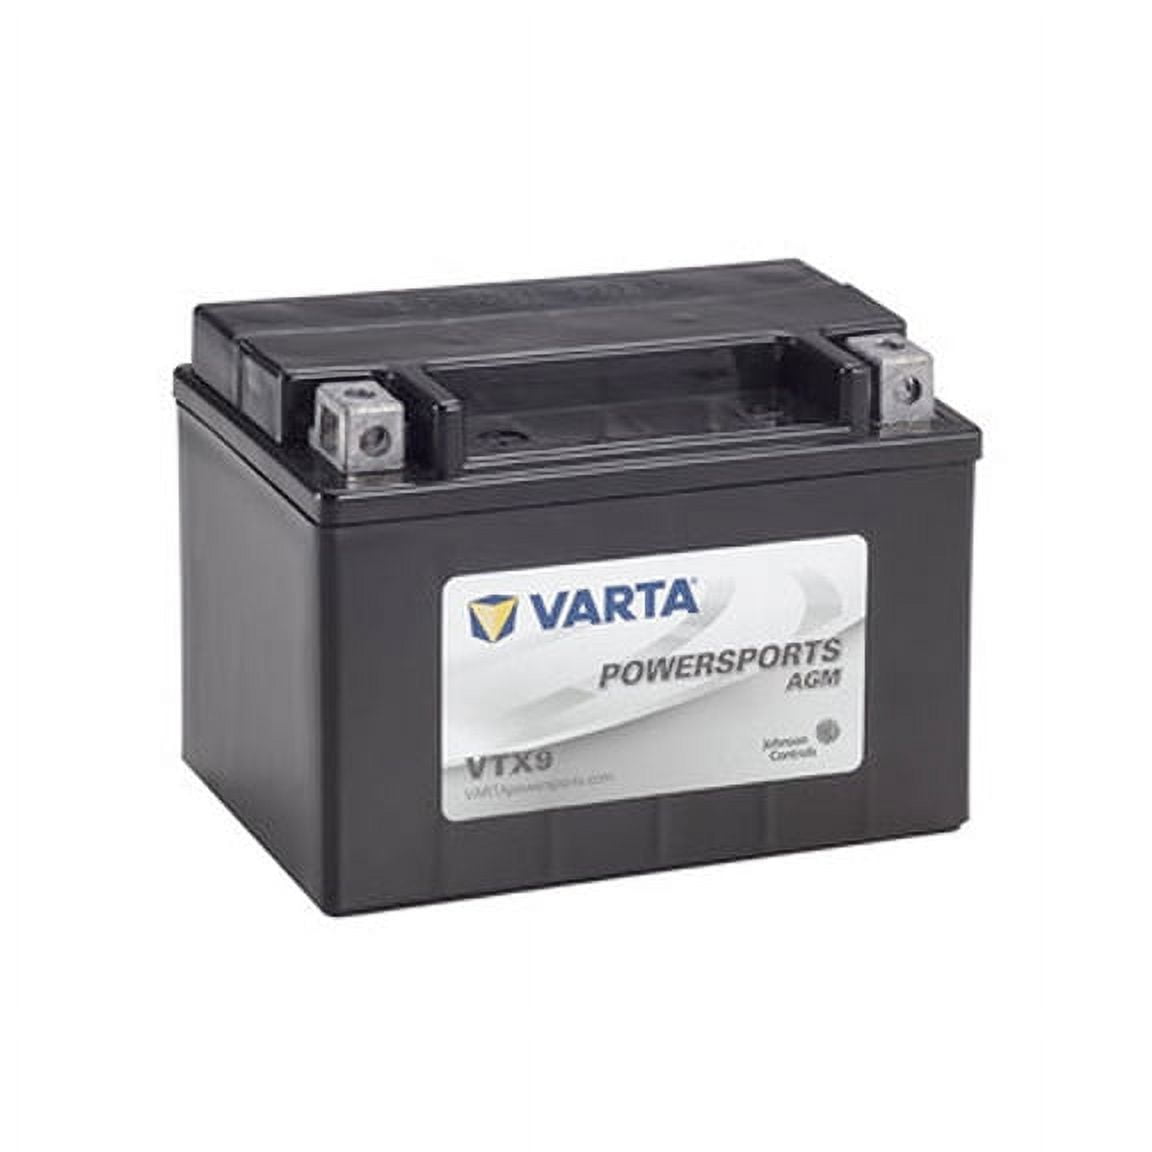 Varta AGM Sealed and Charged Motorcycle Battery VTX9